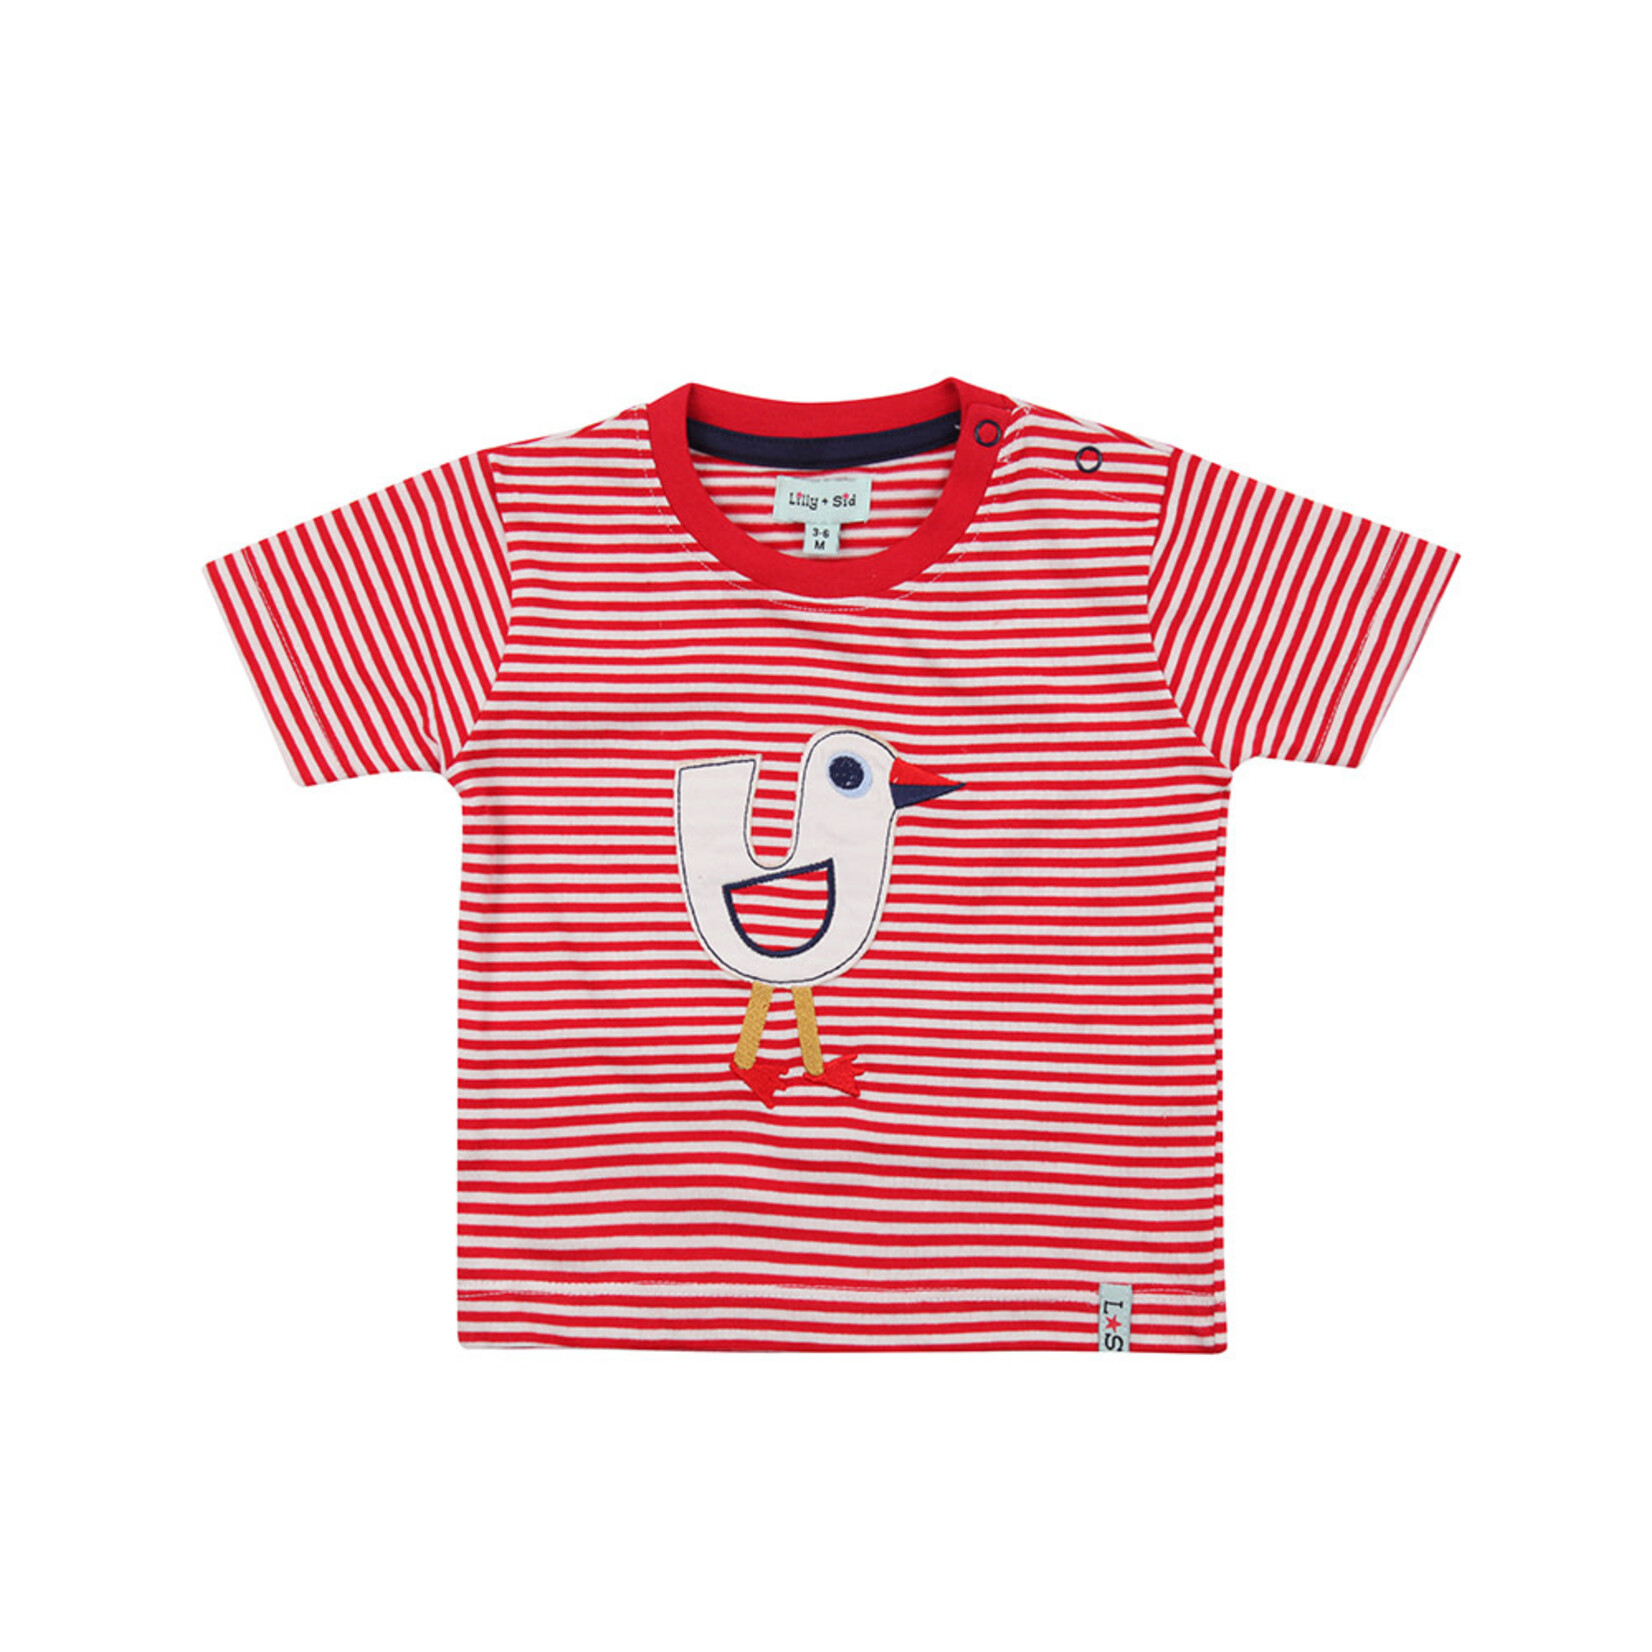 Lilly+Sid LILLY+SID - Two-piece Set - Red Striped T-shirt with Seagull Appliqué and Matching Shorts